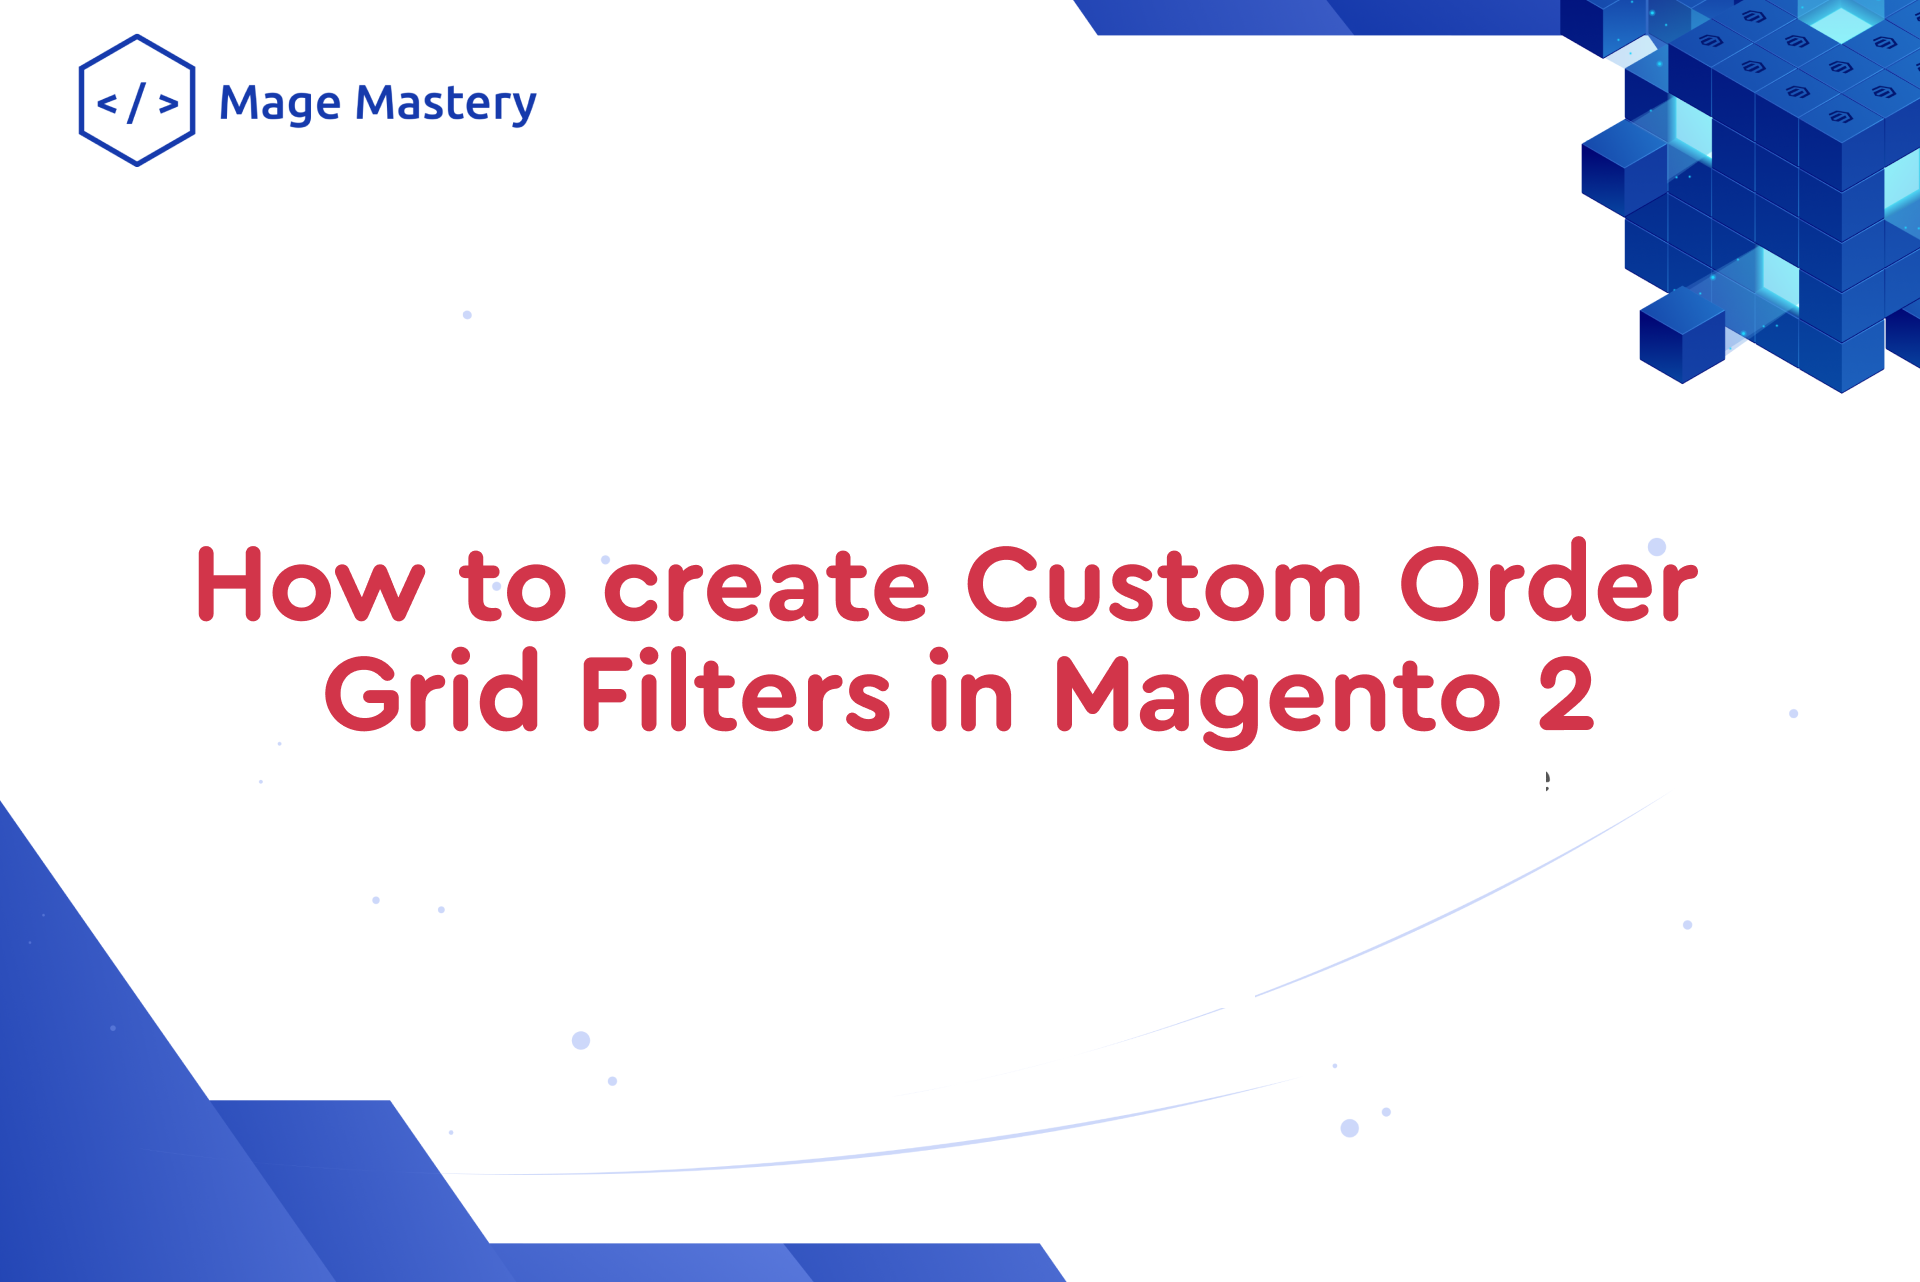 How to create Custom Order Grid Filters in Magento 2